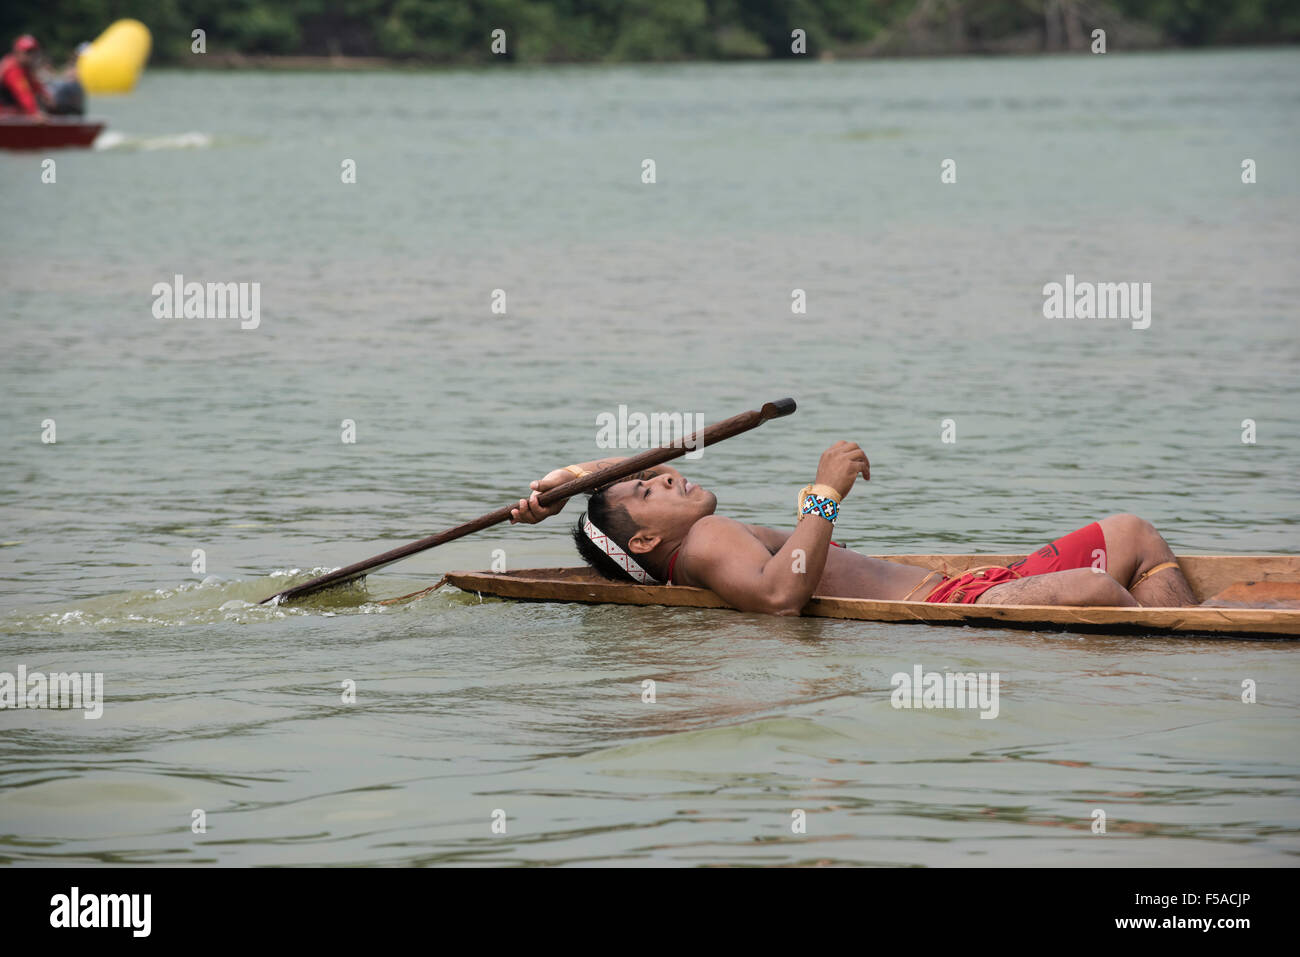 Palmas, Brazil. 30th October, 2015. A Matis competitor lies back in relief after his heat in the canoeing event at the International Indigenous Games, in the city of Palmas, Tocantins State, Brazil. Credit:  Sue Cunningham Photographic/Alamy Live News Stock Photo